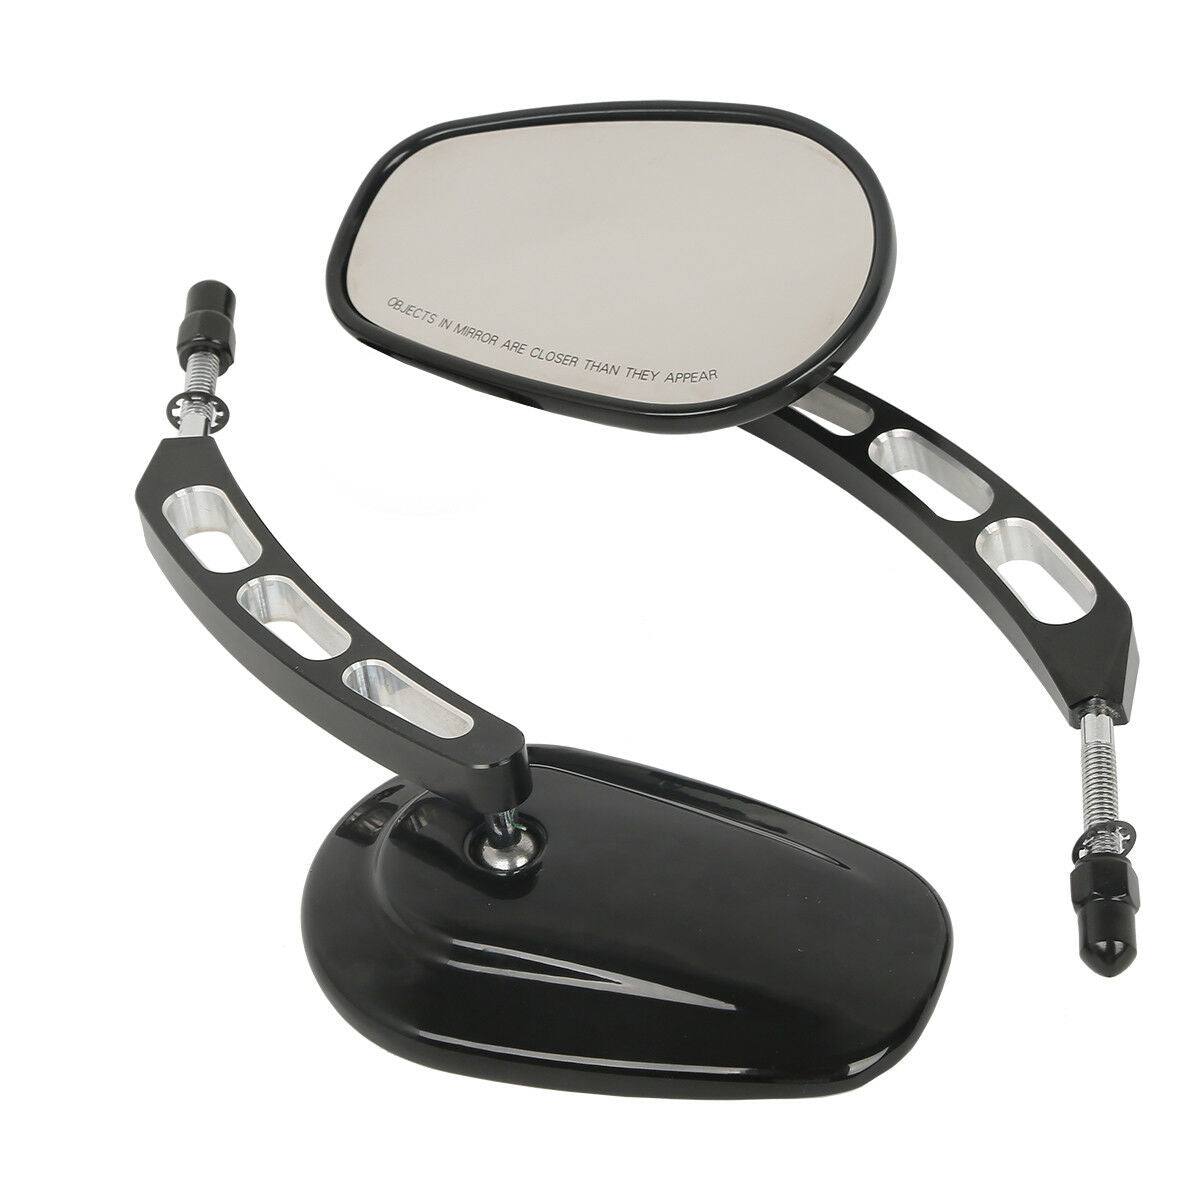 🔥 8mm Rear View Side Mirrors Fit For Harley Road Glide King Street Bob 11-16 15 - Moto Life Products